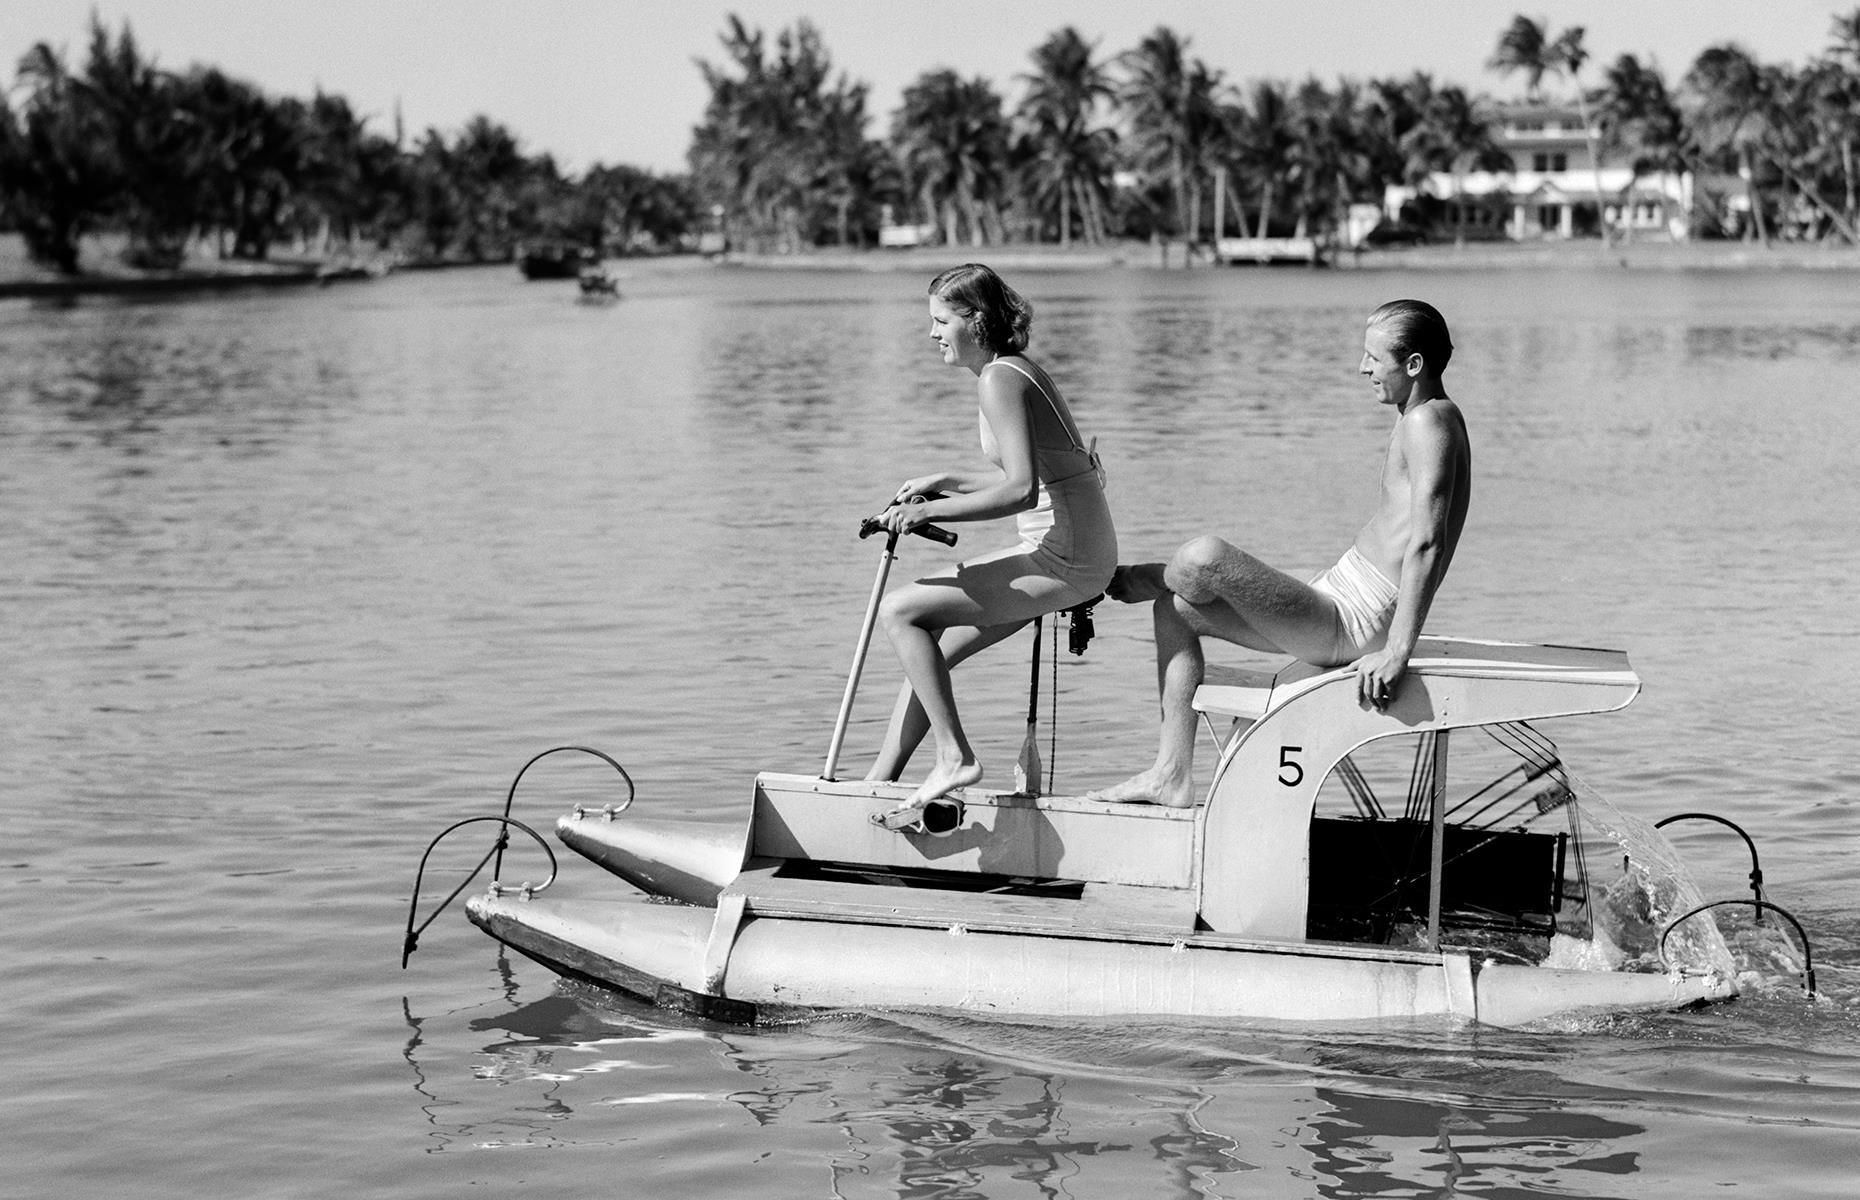 There was plenty more beyond the pool at Miami's glittering resorts, and those who could bear to tear themselves away would be richly rewarded. Here a young couple ride a pedal boat in the waters around Miami Beach's glamorous South Beach neighborhood in the 1940s.